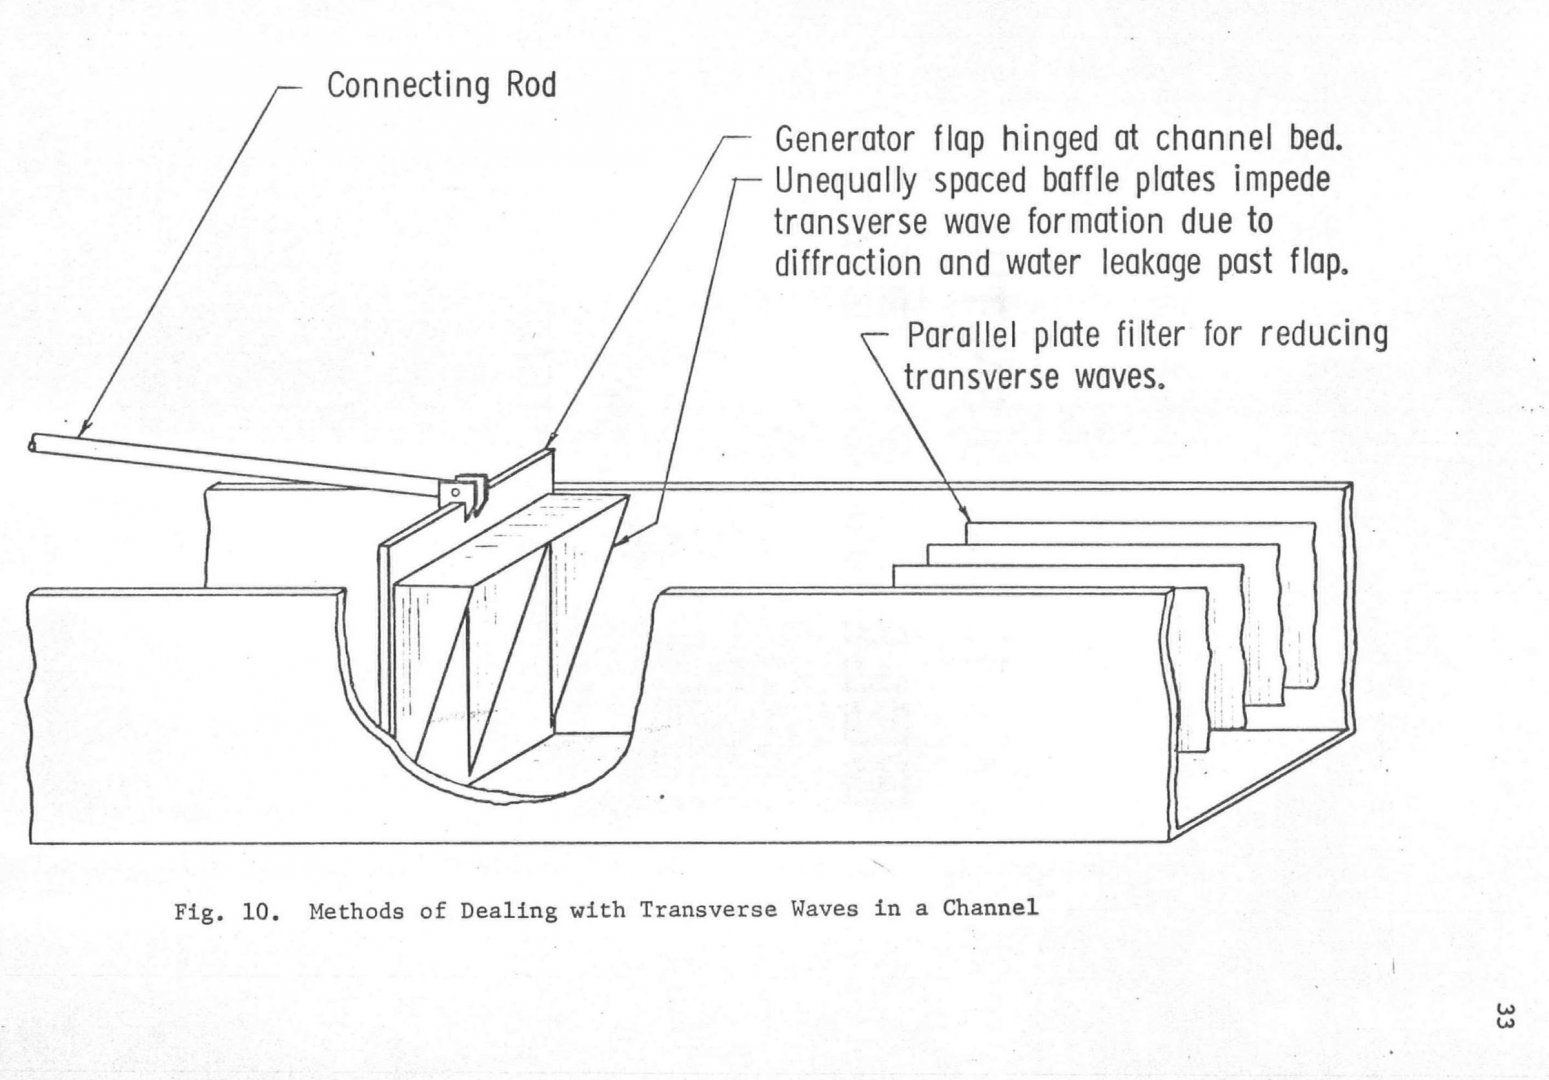 016_Theory of Wave Generation for a Short Flume.jpg